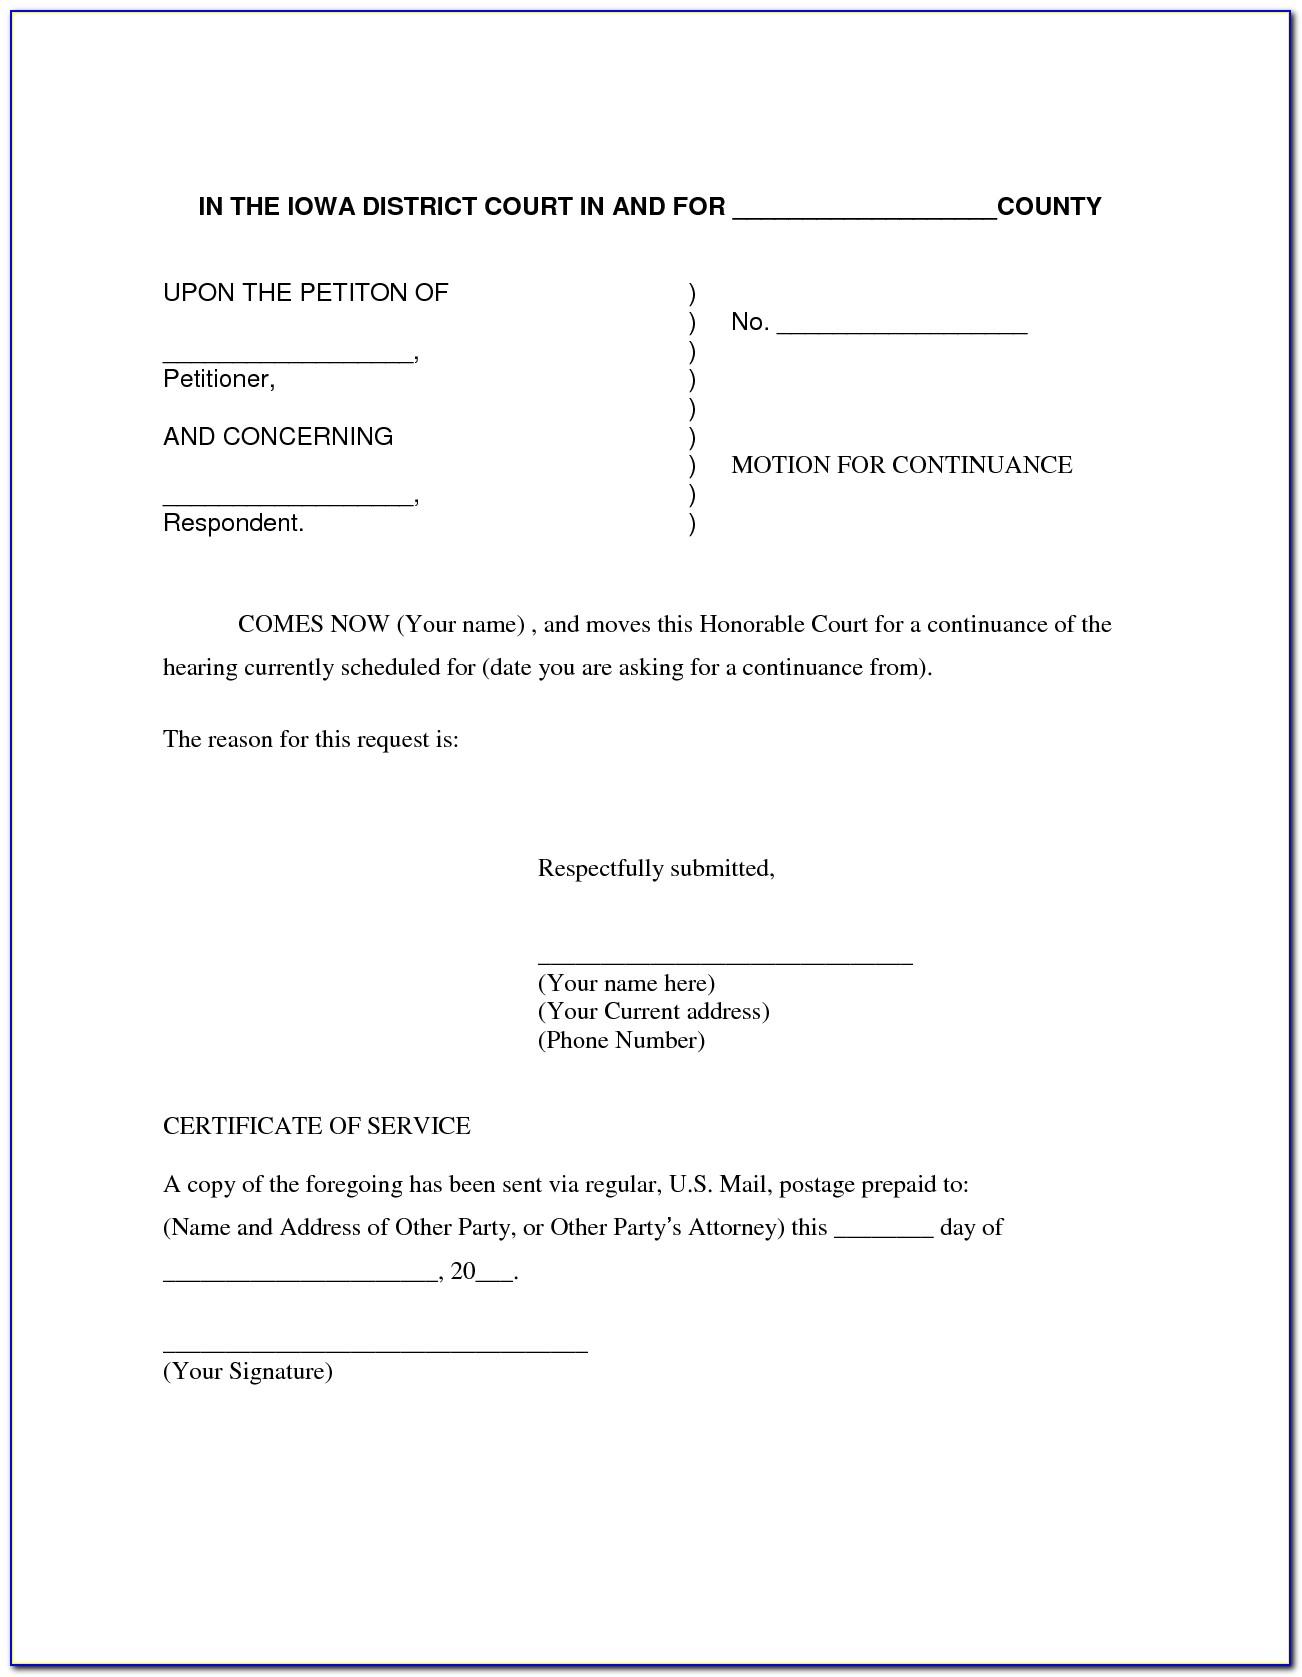 Texas Agreed Motion For Continuance Form